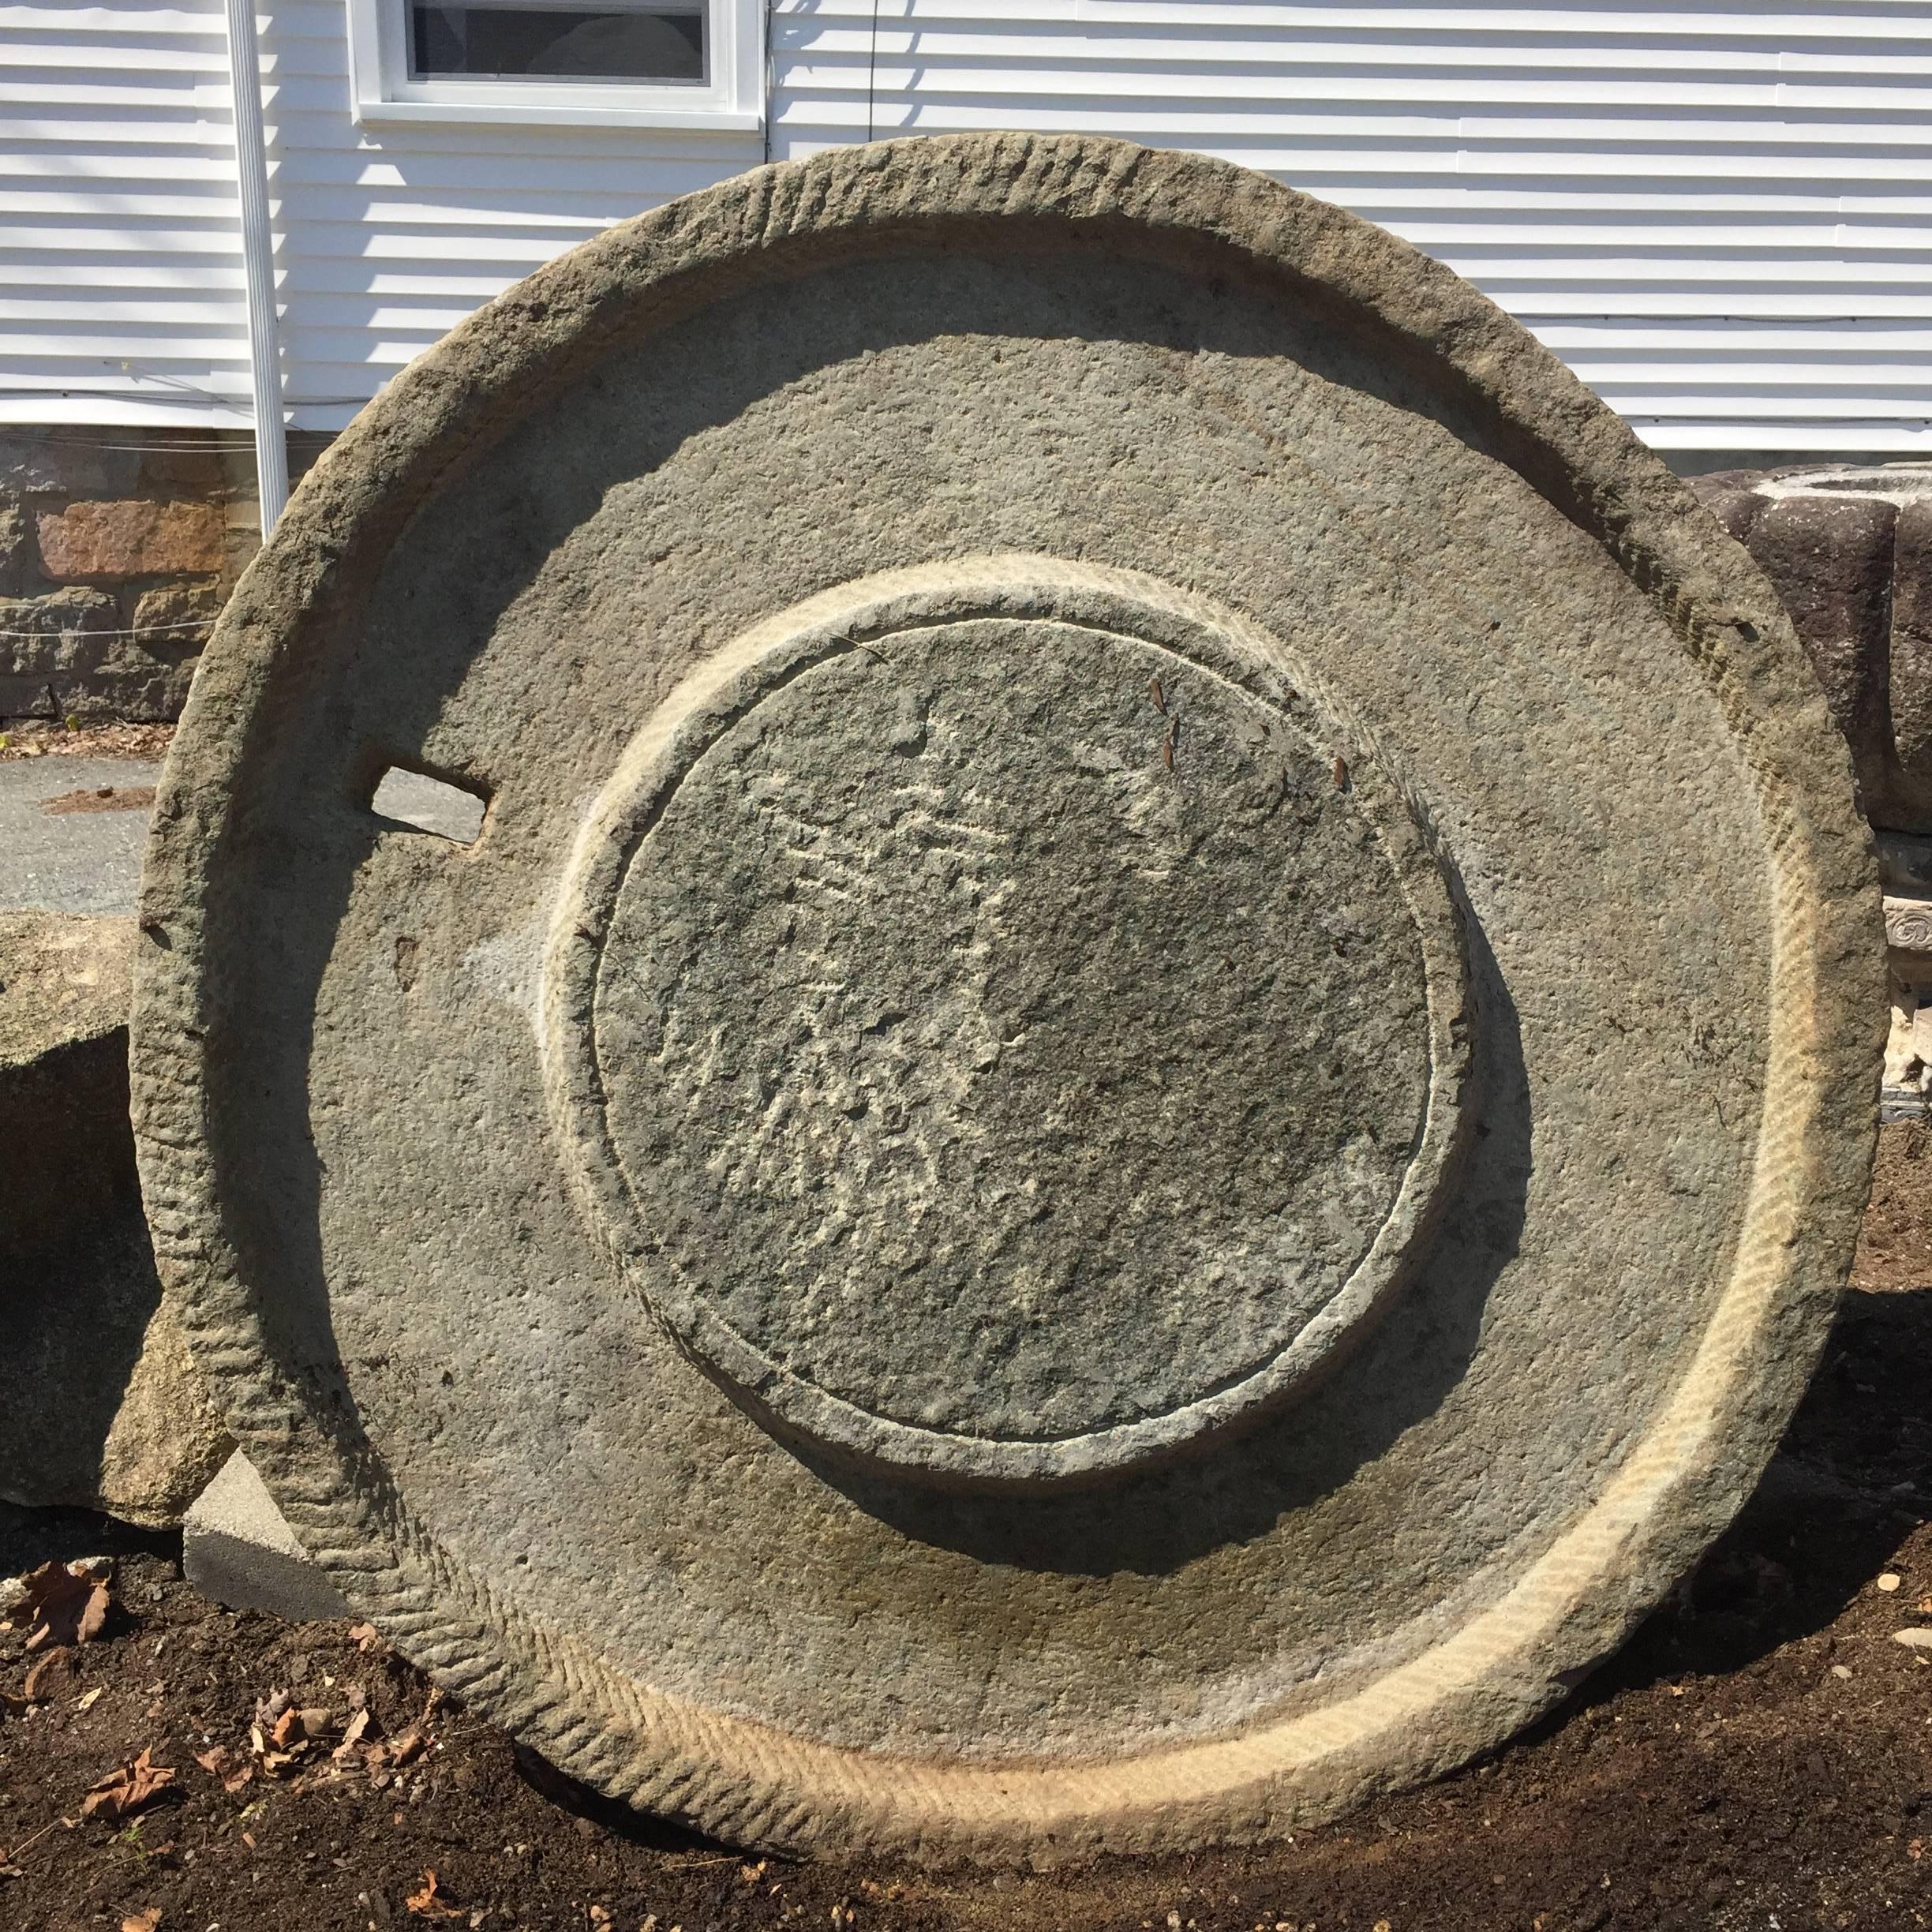 From China, comes this huge 46 inch diameter round hand carved mill stone from the 19th century or earlier period. This was likely a grinding base stone for a large oil pressing tool and device.

Dimensions:  46 inches diameter and 4 inches thick